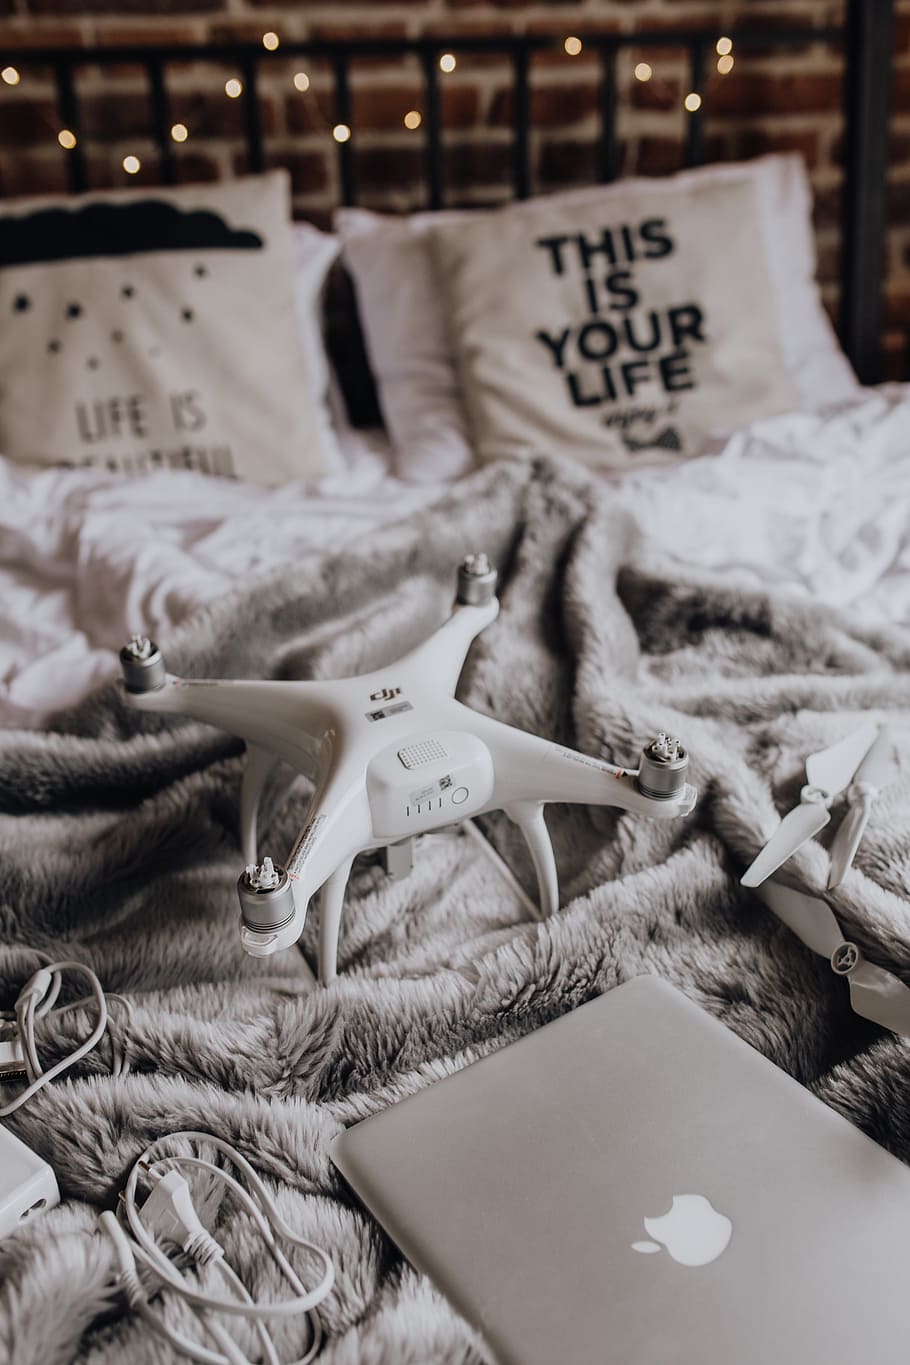 Drone, laptop and accessories lie on the bed ready for travel, HD wallpaper